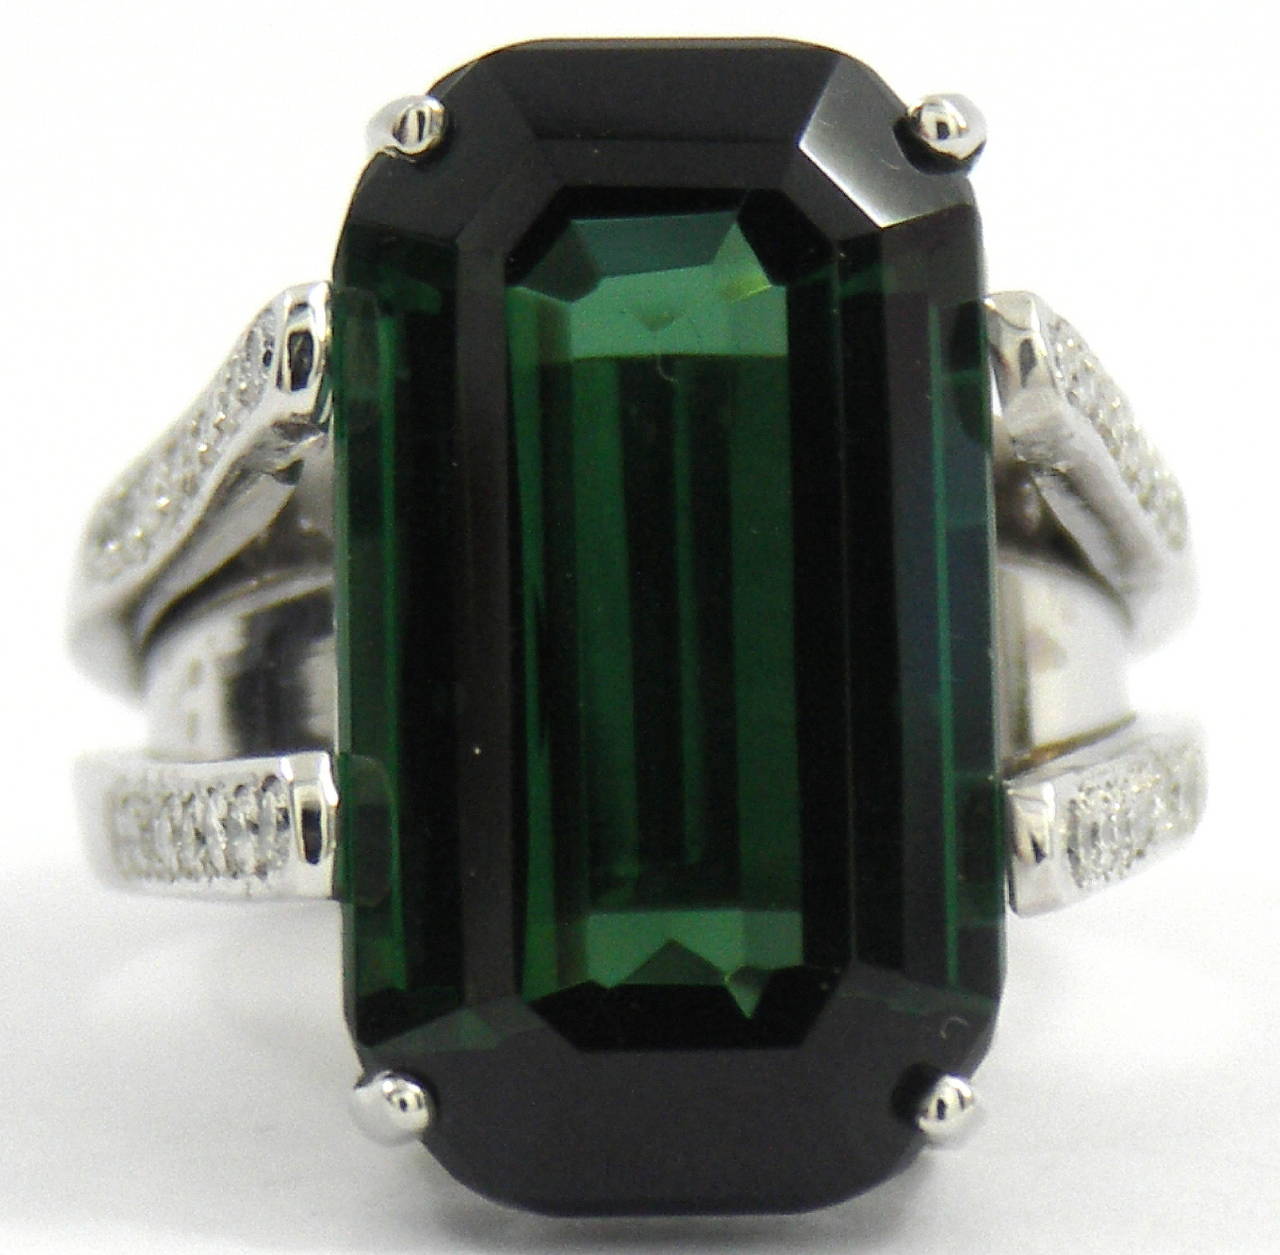 A split-shouldered platinum ring set with 32 round brilliant cut diamonds for a total approximate weight of 0.75ct. The center stone is a beautifully balanced, emerald cut, green tourmaline weighing 22.15ct.